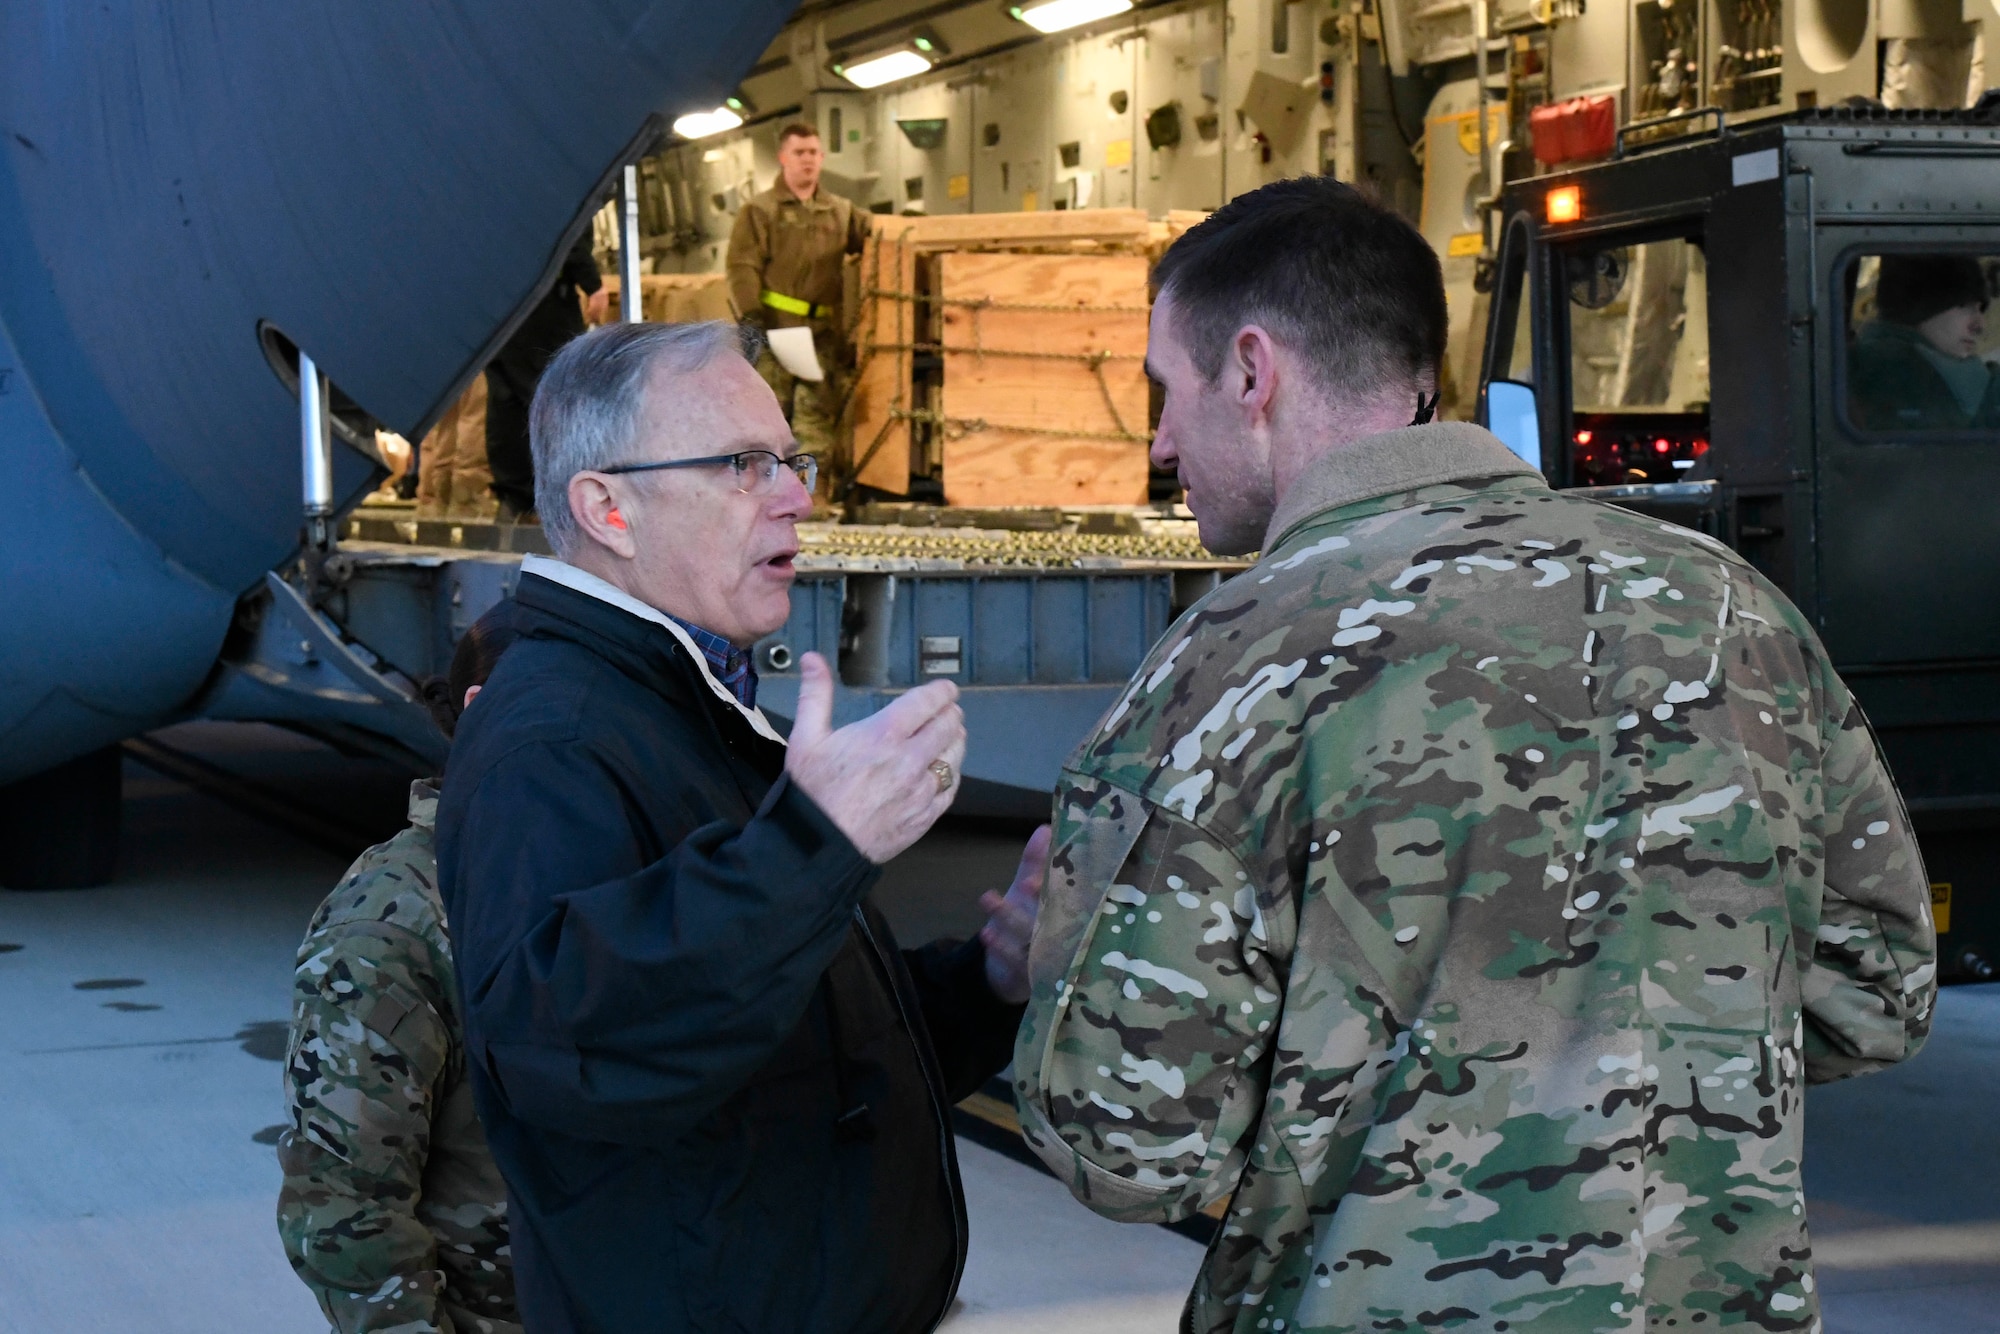 The Honorable Dr. Bruce D. Jette, assistant secretary of the Army (acquisition, logistics and technology), speaks with 1st Lt. Chris Ford, 436th Aerial Port Squadron, in front of a United Arab Emirates air force C-17 Globemaster III Jan. 26, 2020, at Dover Air Force Base, Del. Jette visited Dover AFB to oversee a shipment of Patriot Advanced Capability 3 Missile Segment Enhanced missiles to the UAE. (U.S. Air Force photo by Senior Airman Eric M. Fisher)